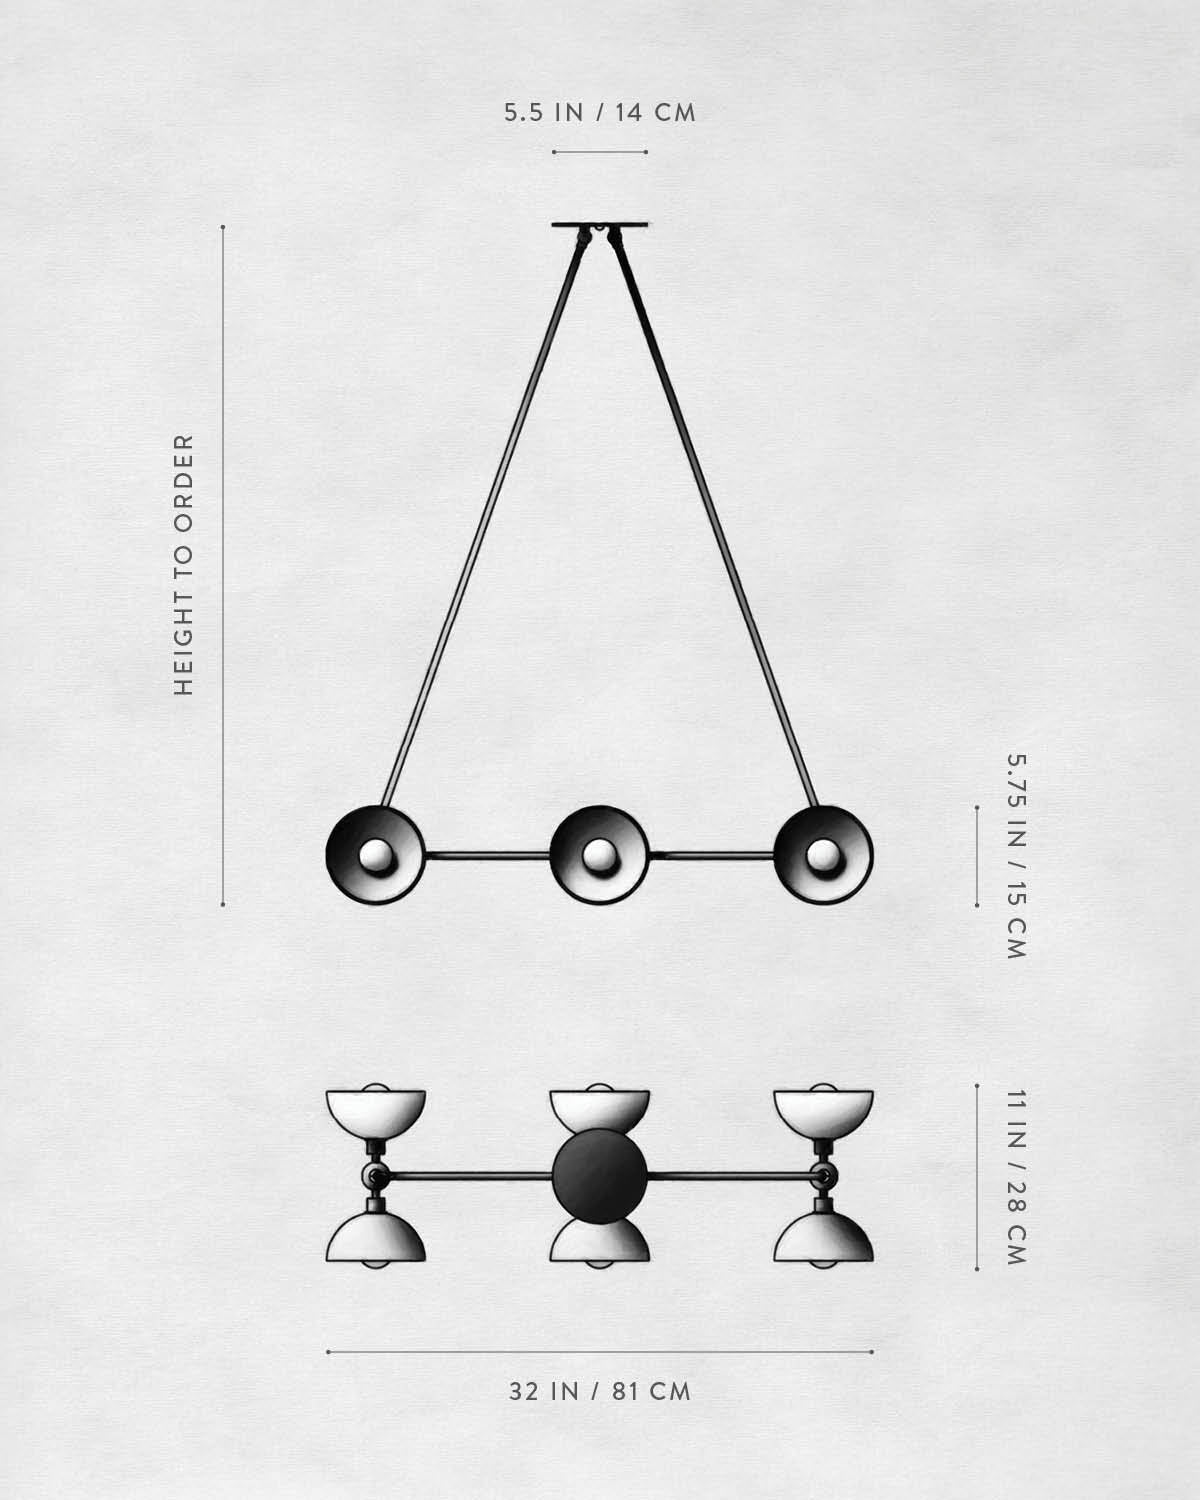 Technical drawing of TRAPEZE : 6 PENDANT.